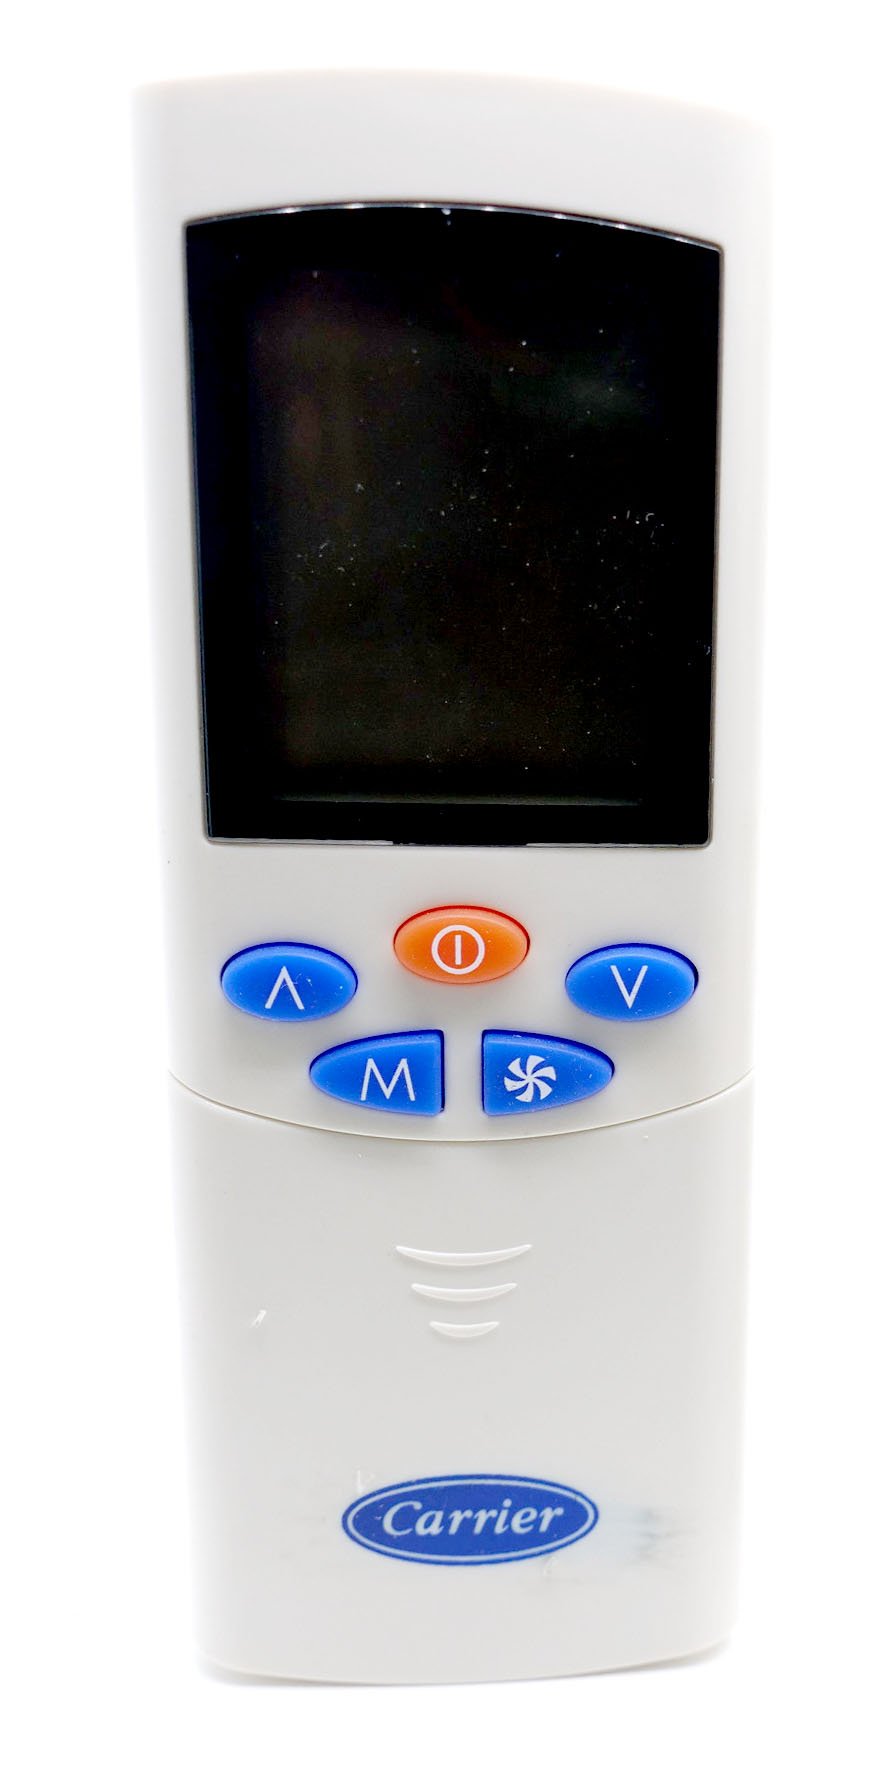 Air Con (A/C) Remote Control for Carrier Air Conditioners